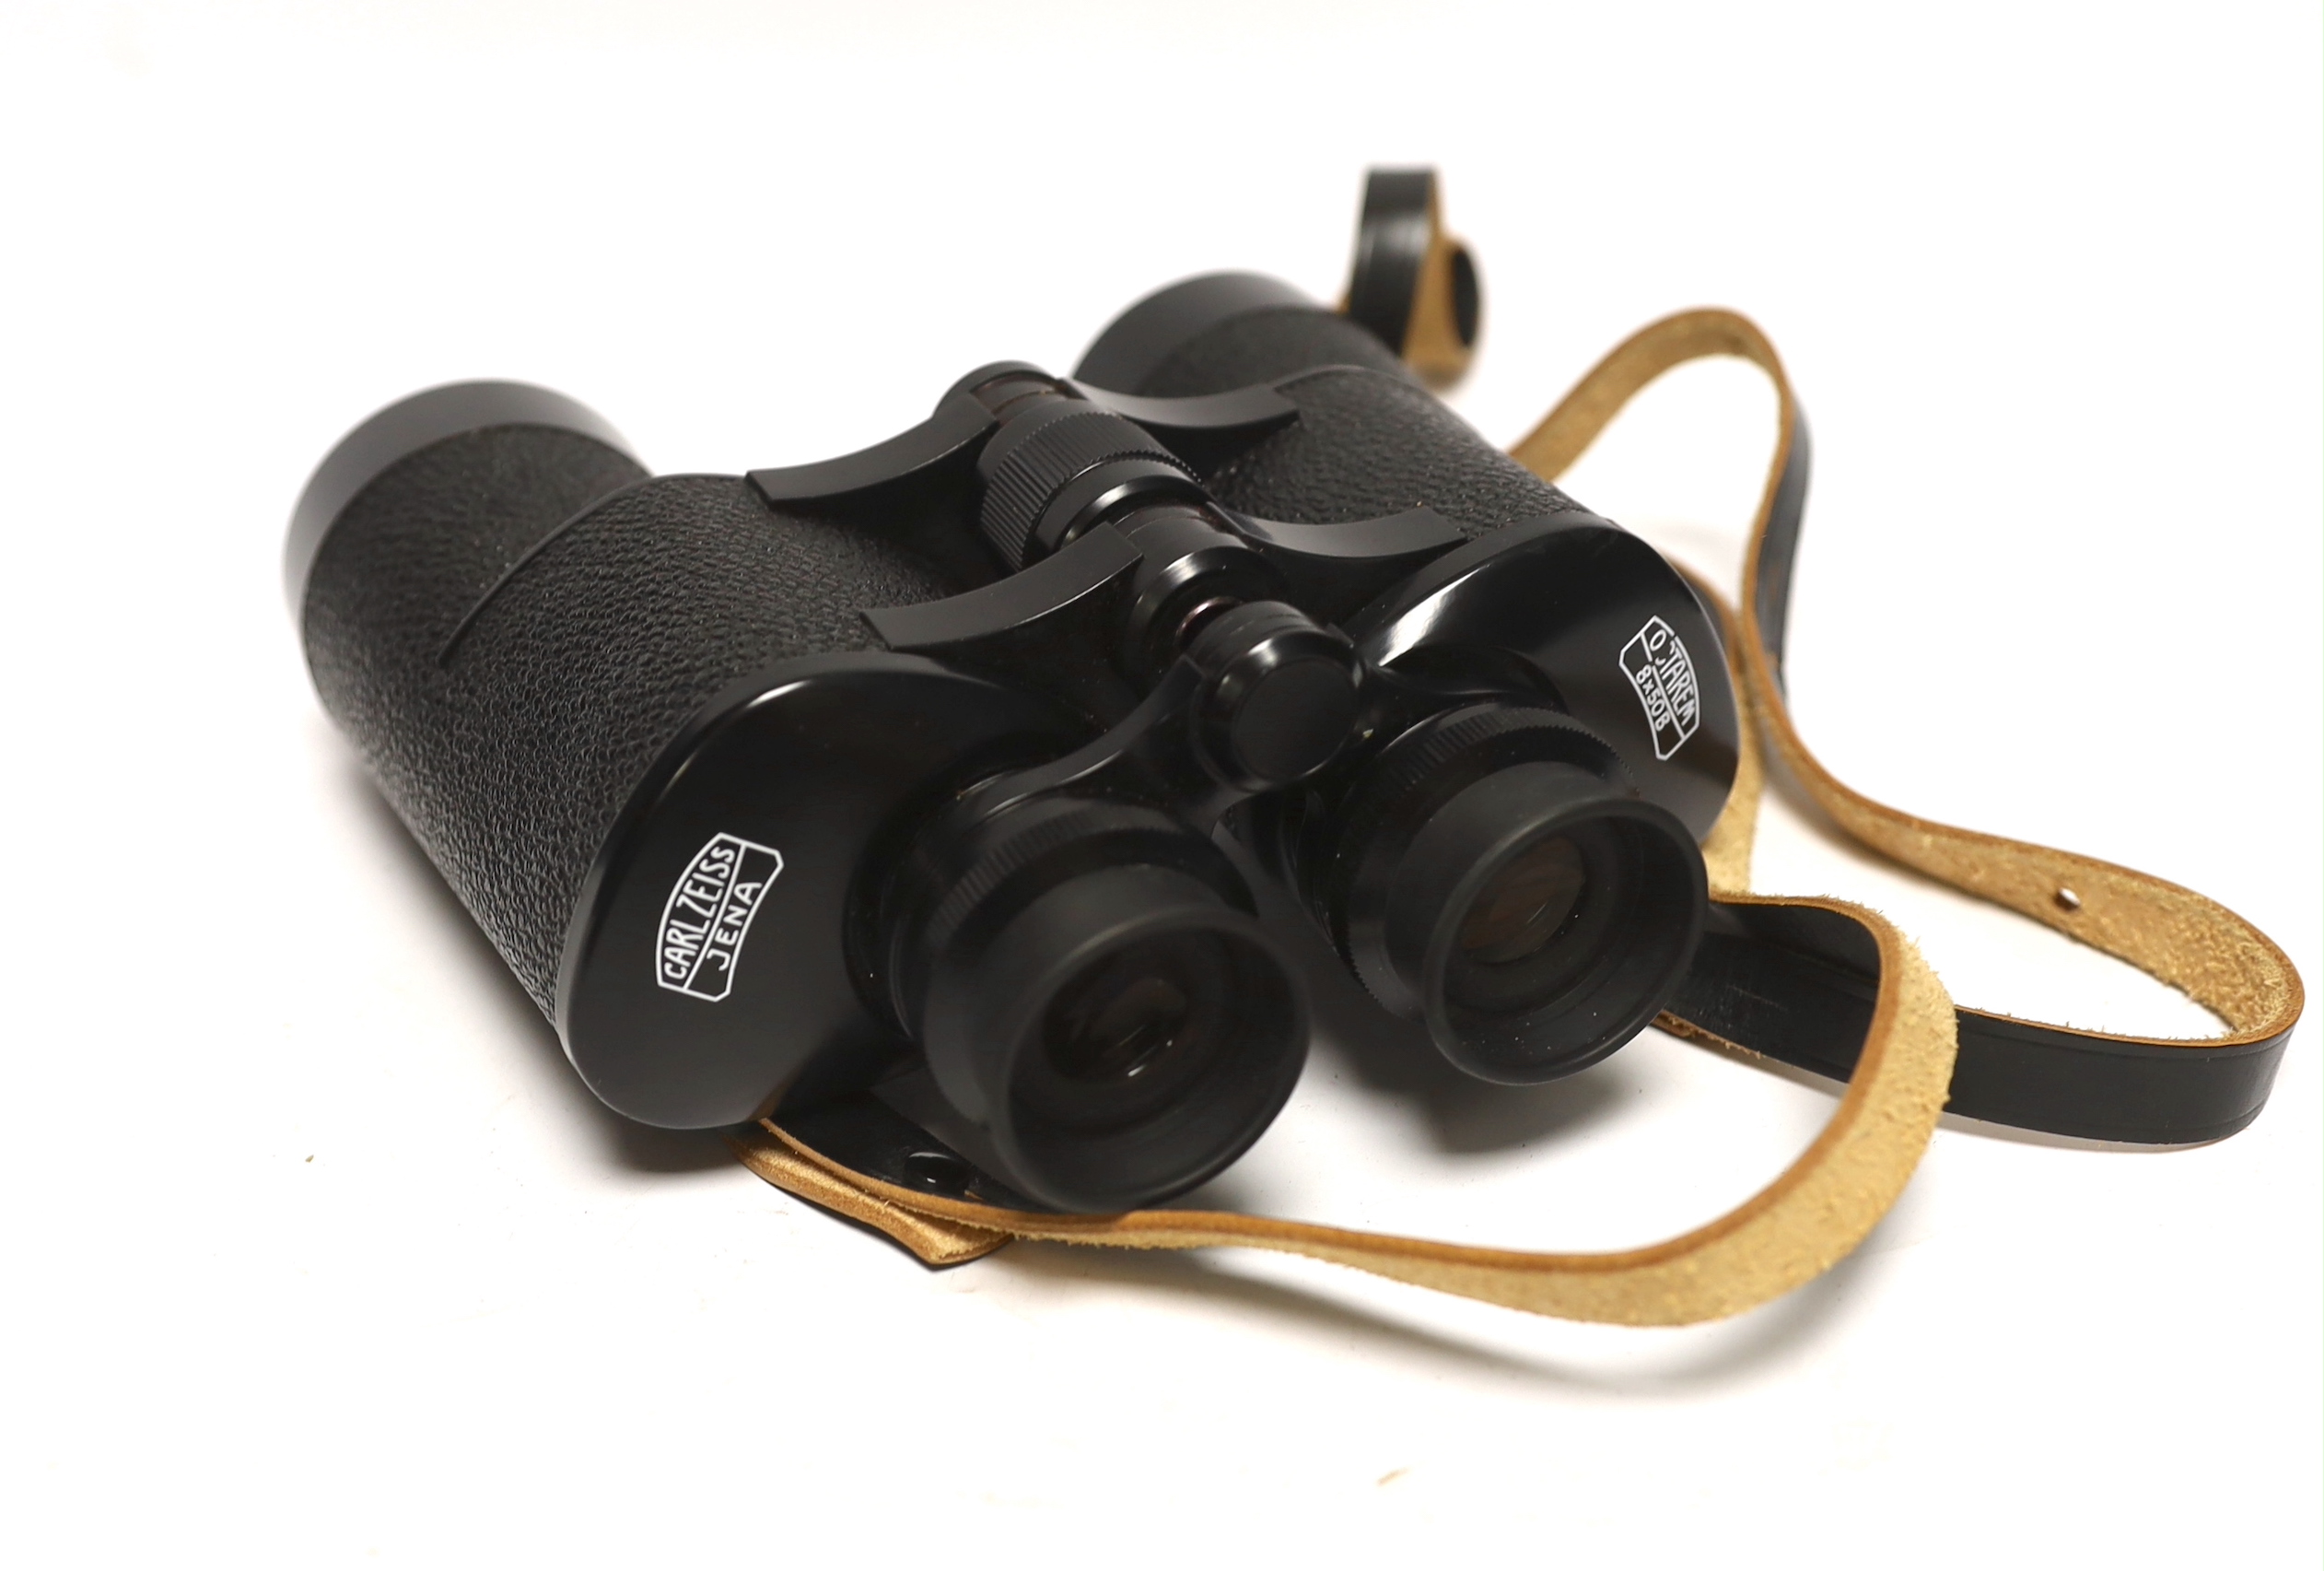 A pair of Zeiss Octarem 8X50B binoculars in a leather case with strap